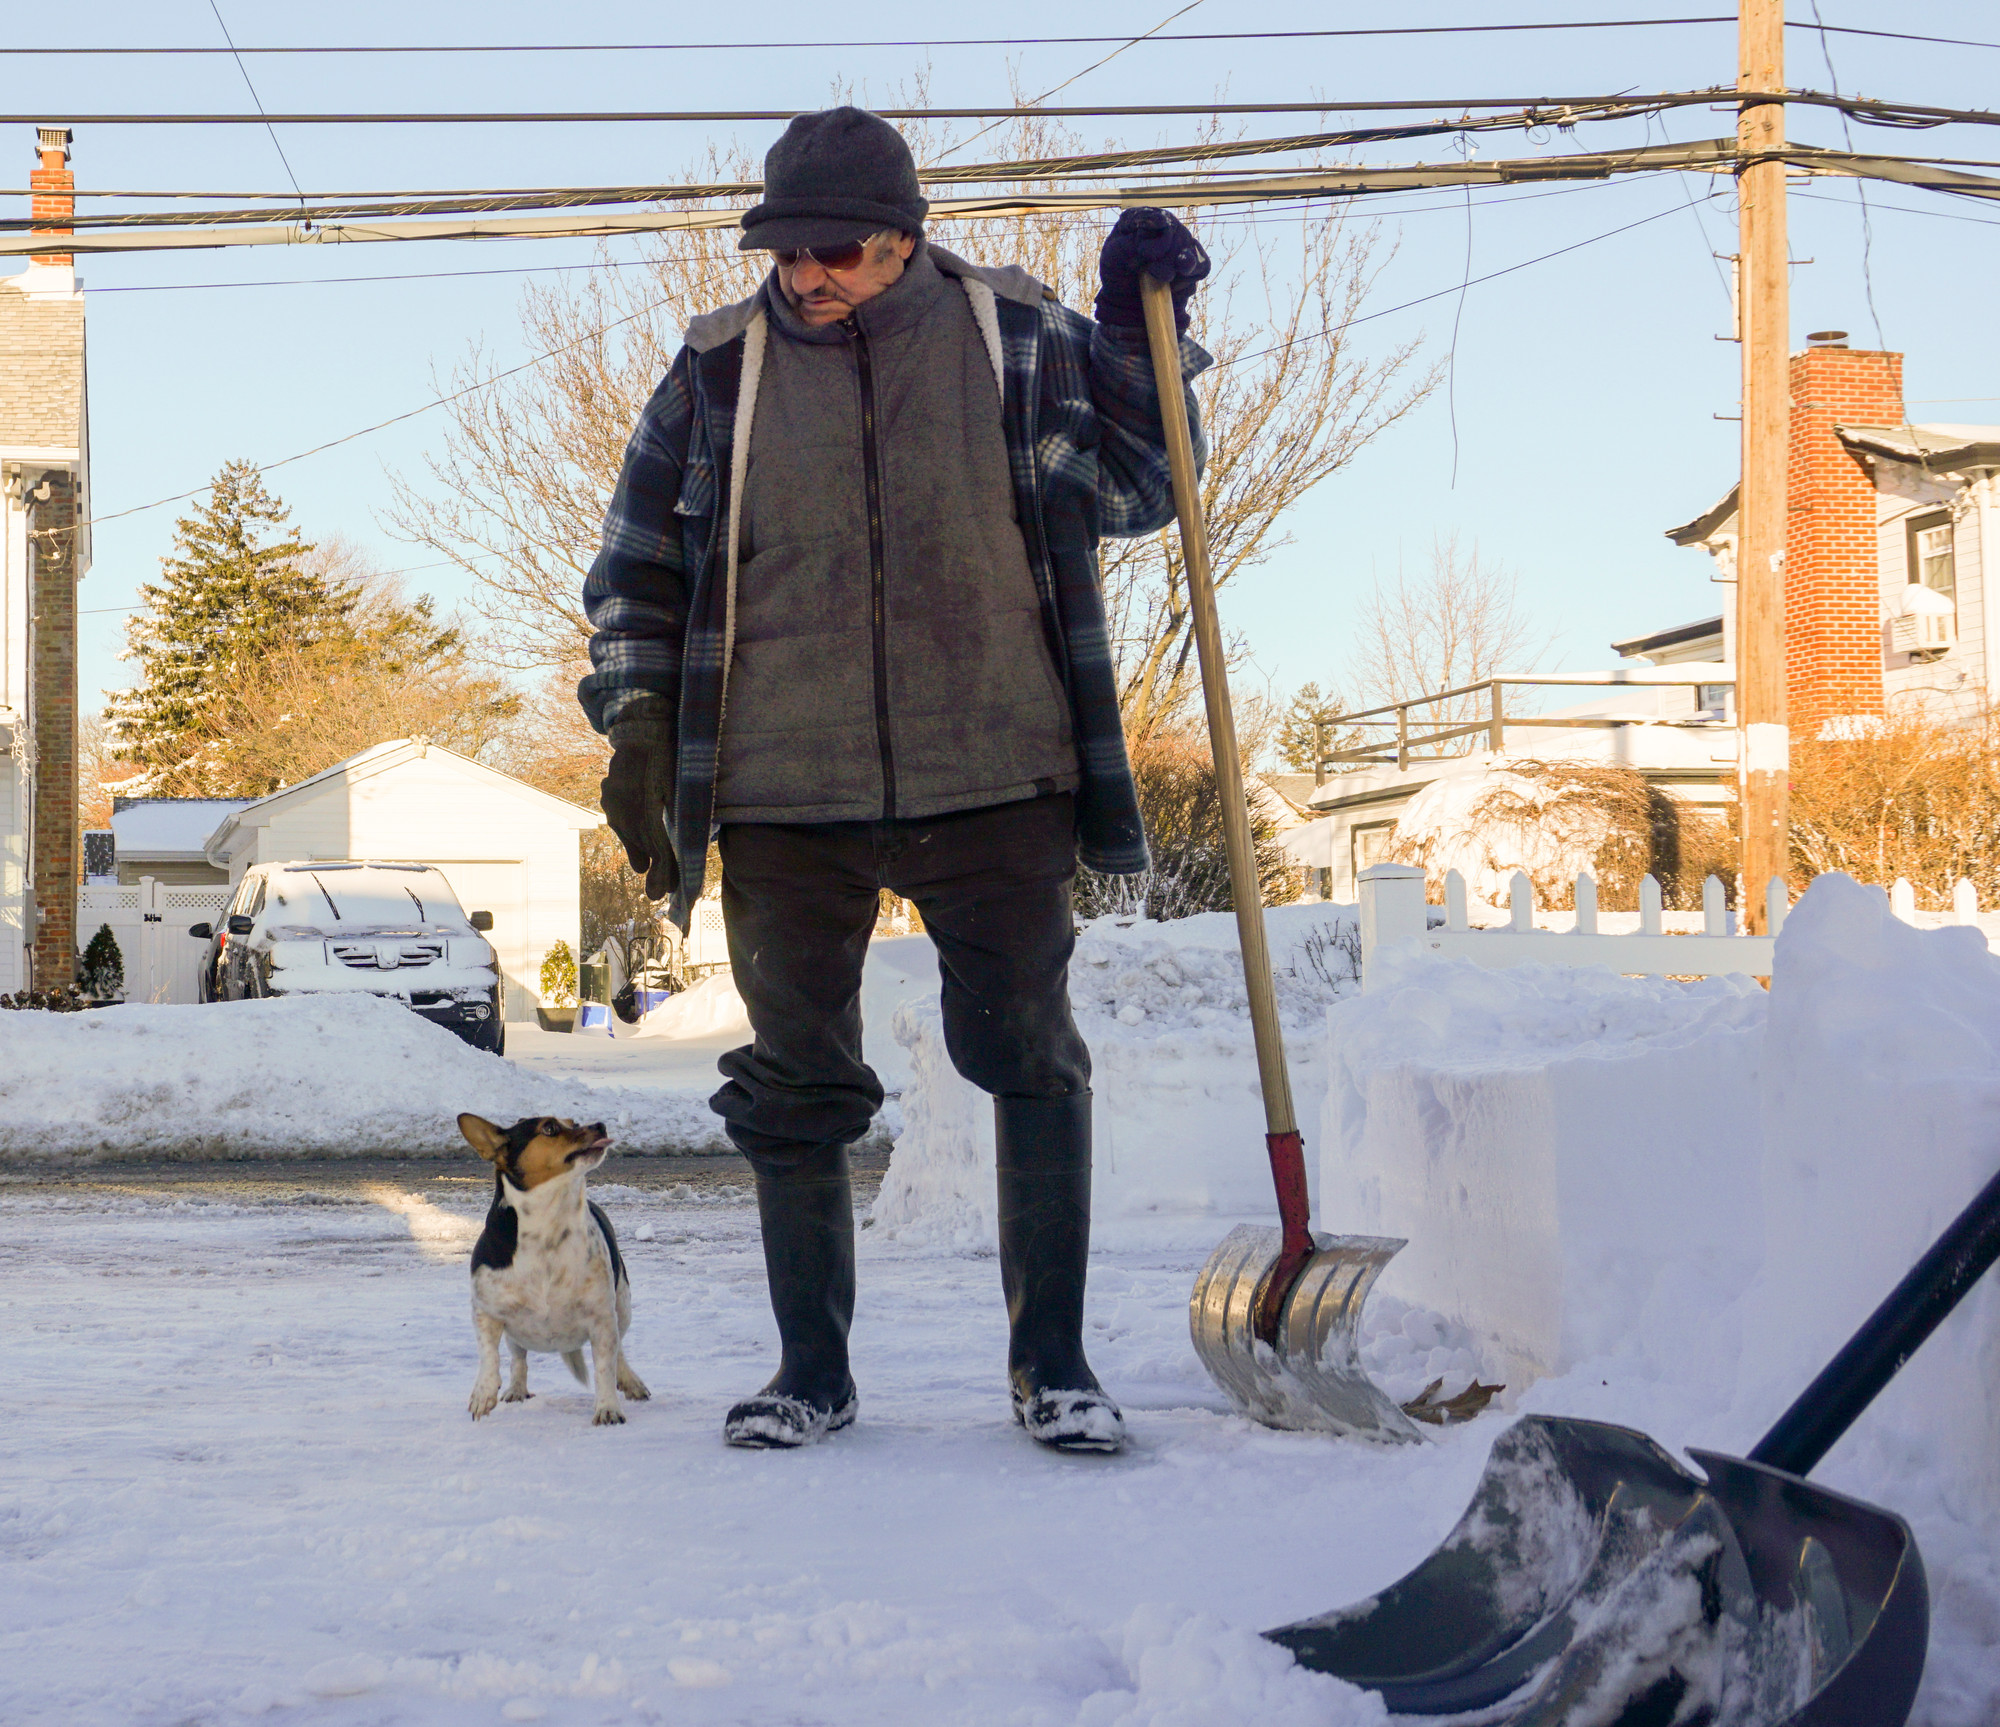 Mario Zano shoveled his driveway on Ocean Avenue with support from his pal, Walter.